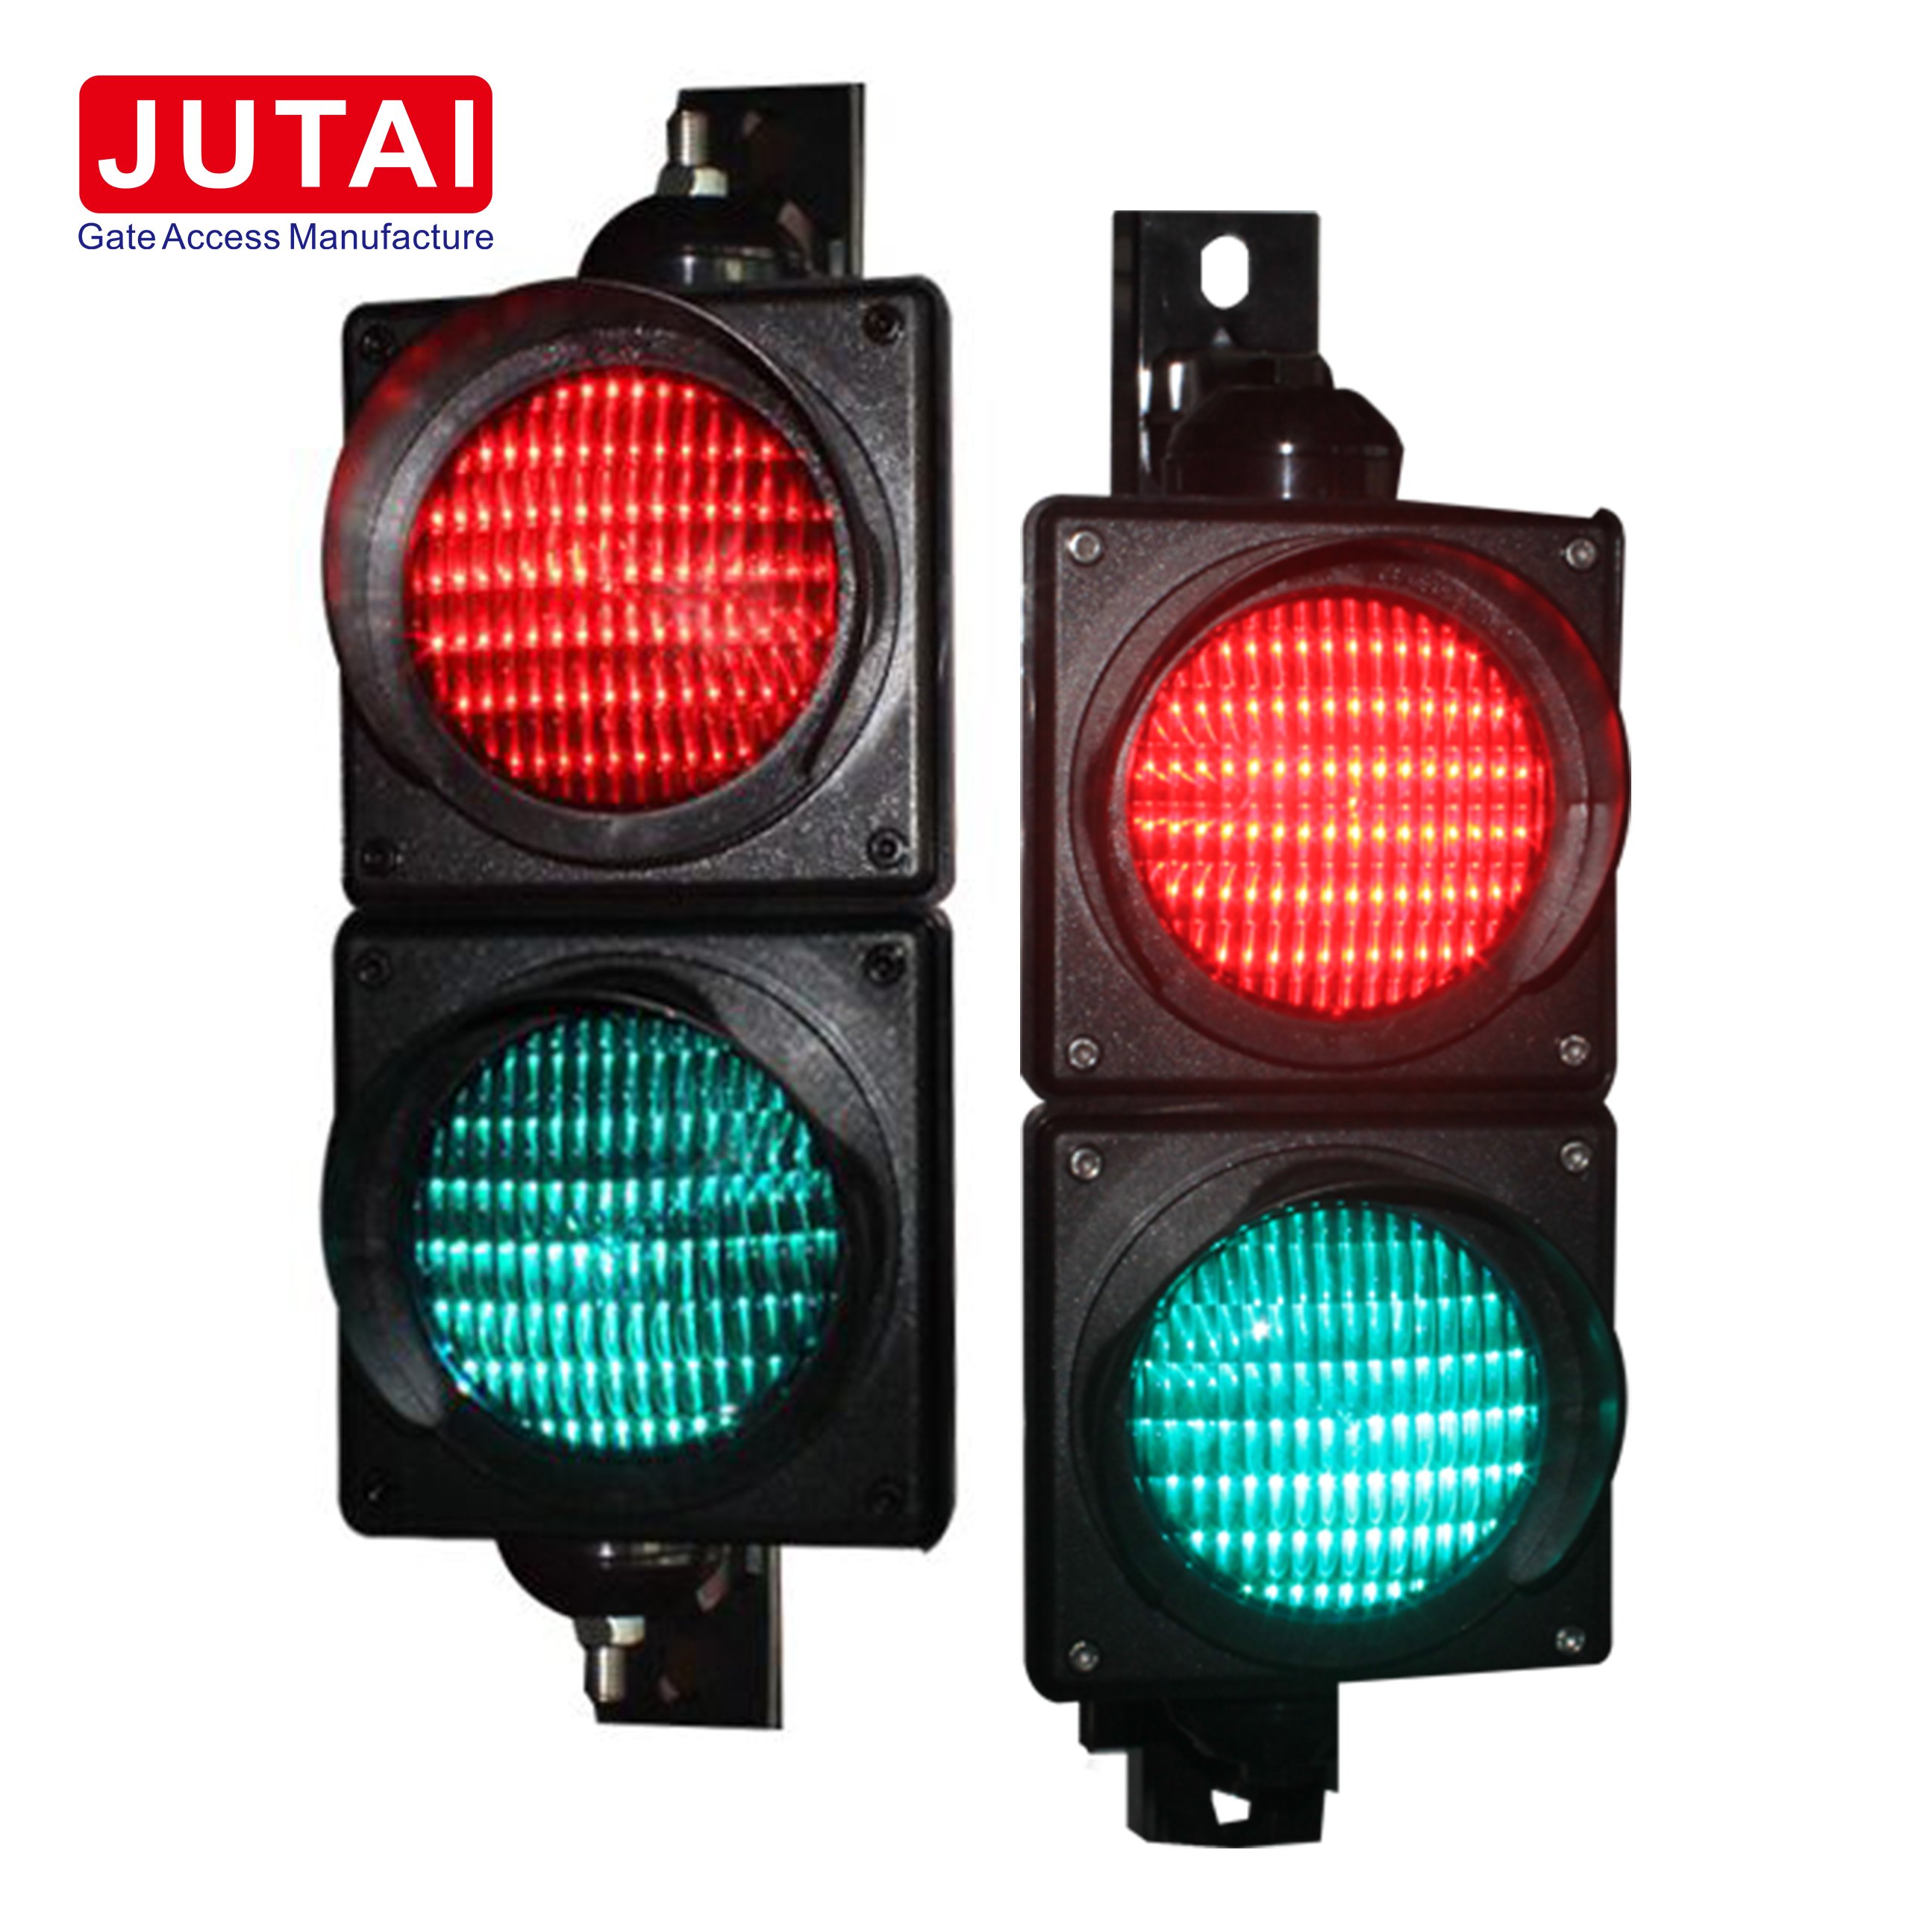 4Inch High Flux Traffic Signal Series For Parking lots Entrance Gate Operator System